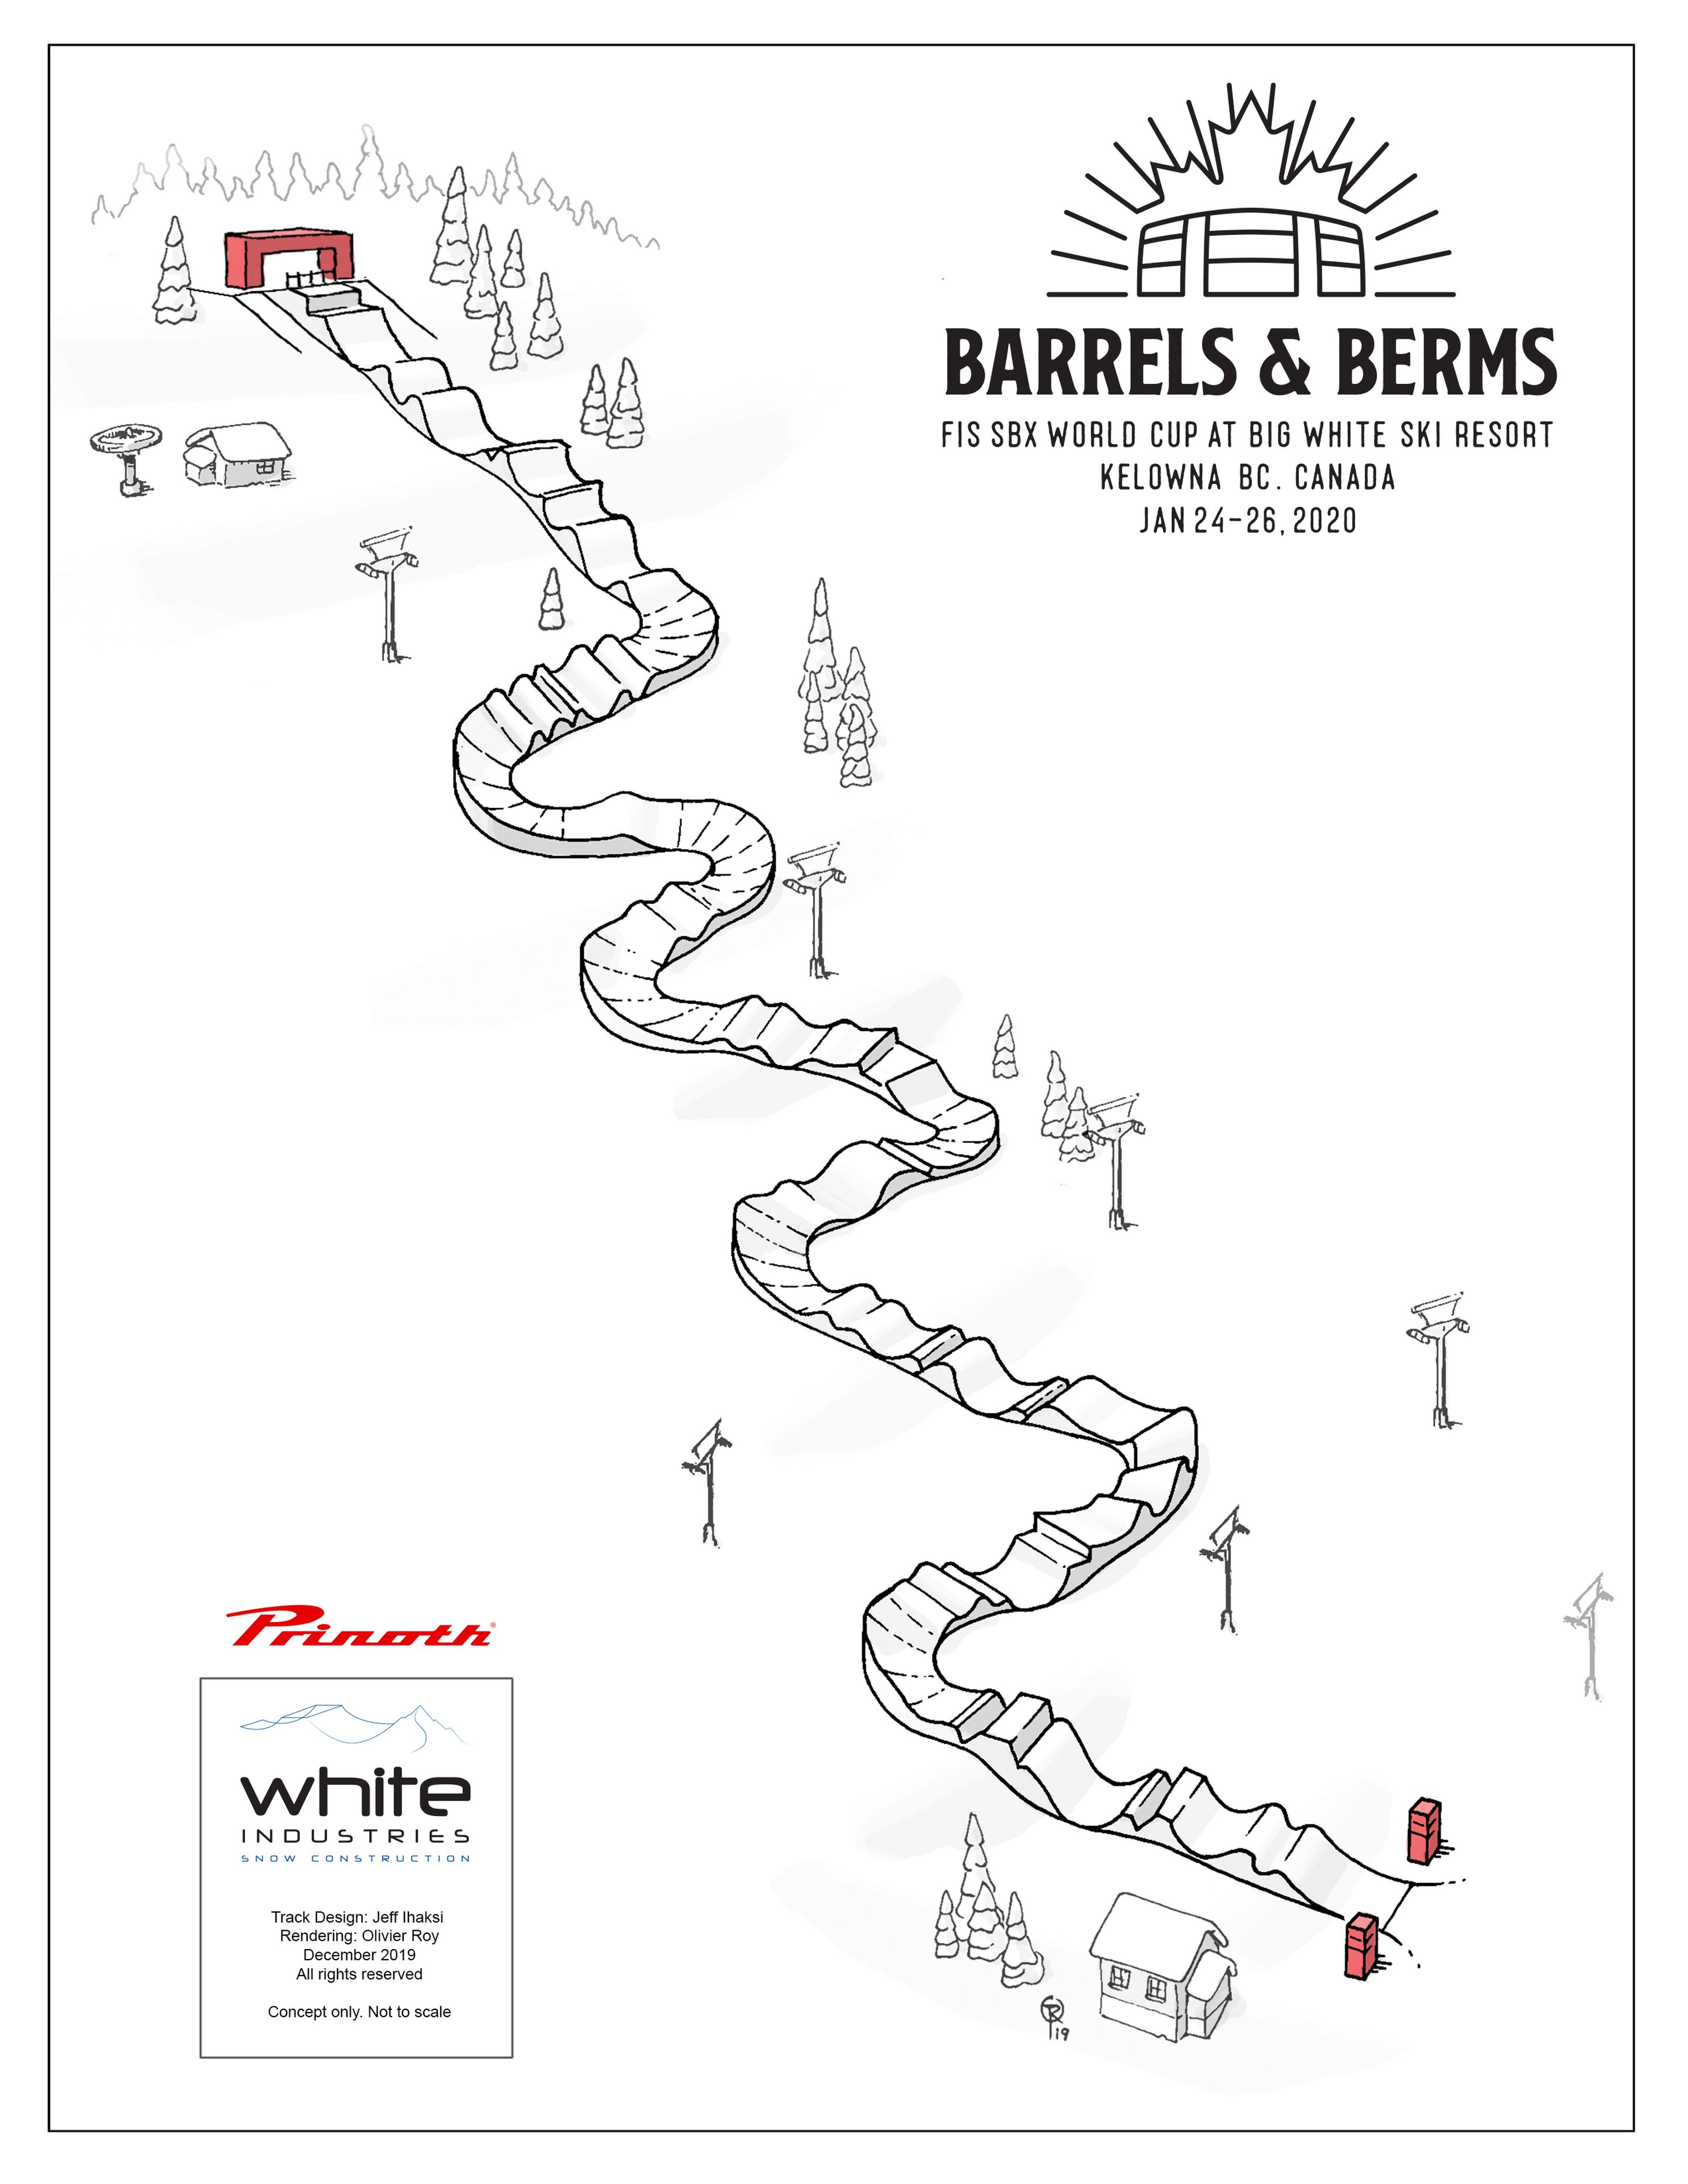 Course map of the Barrels & Berms FIS SBX World Cup